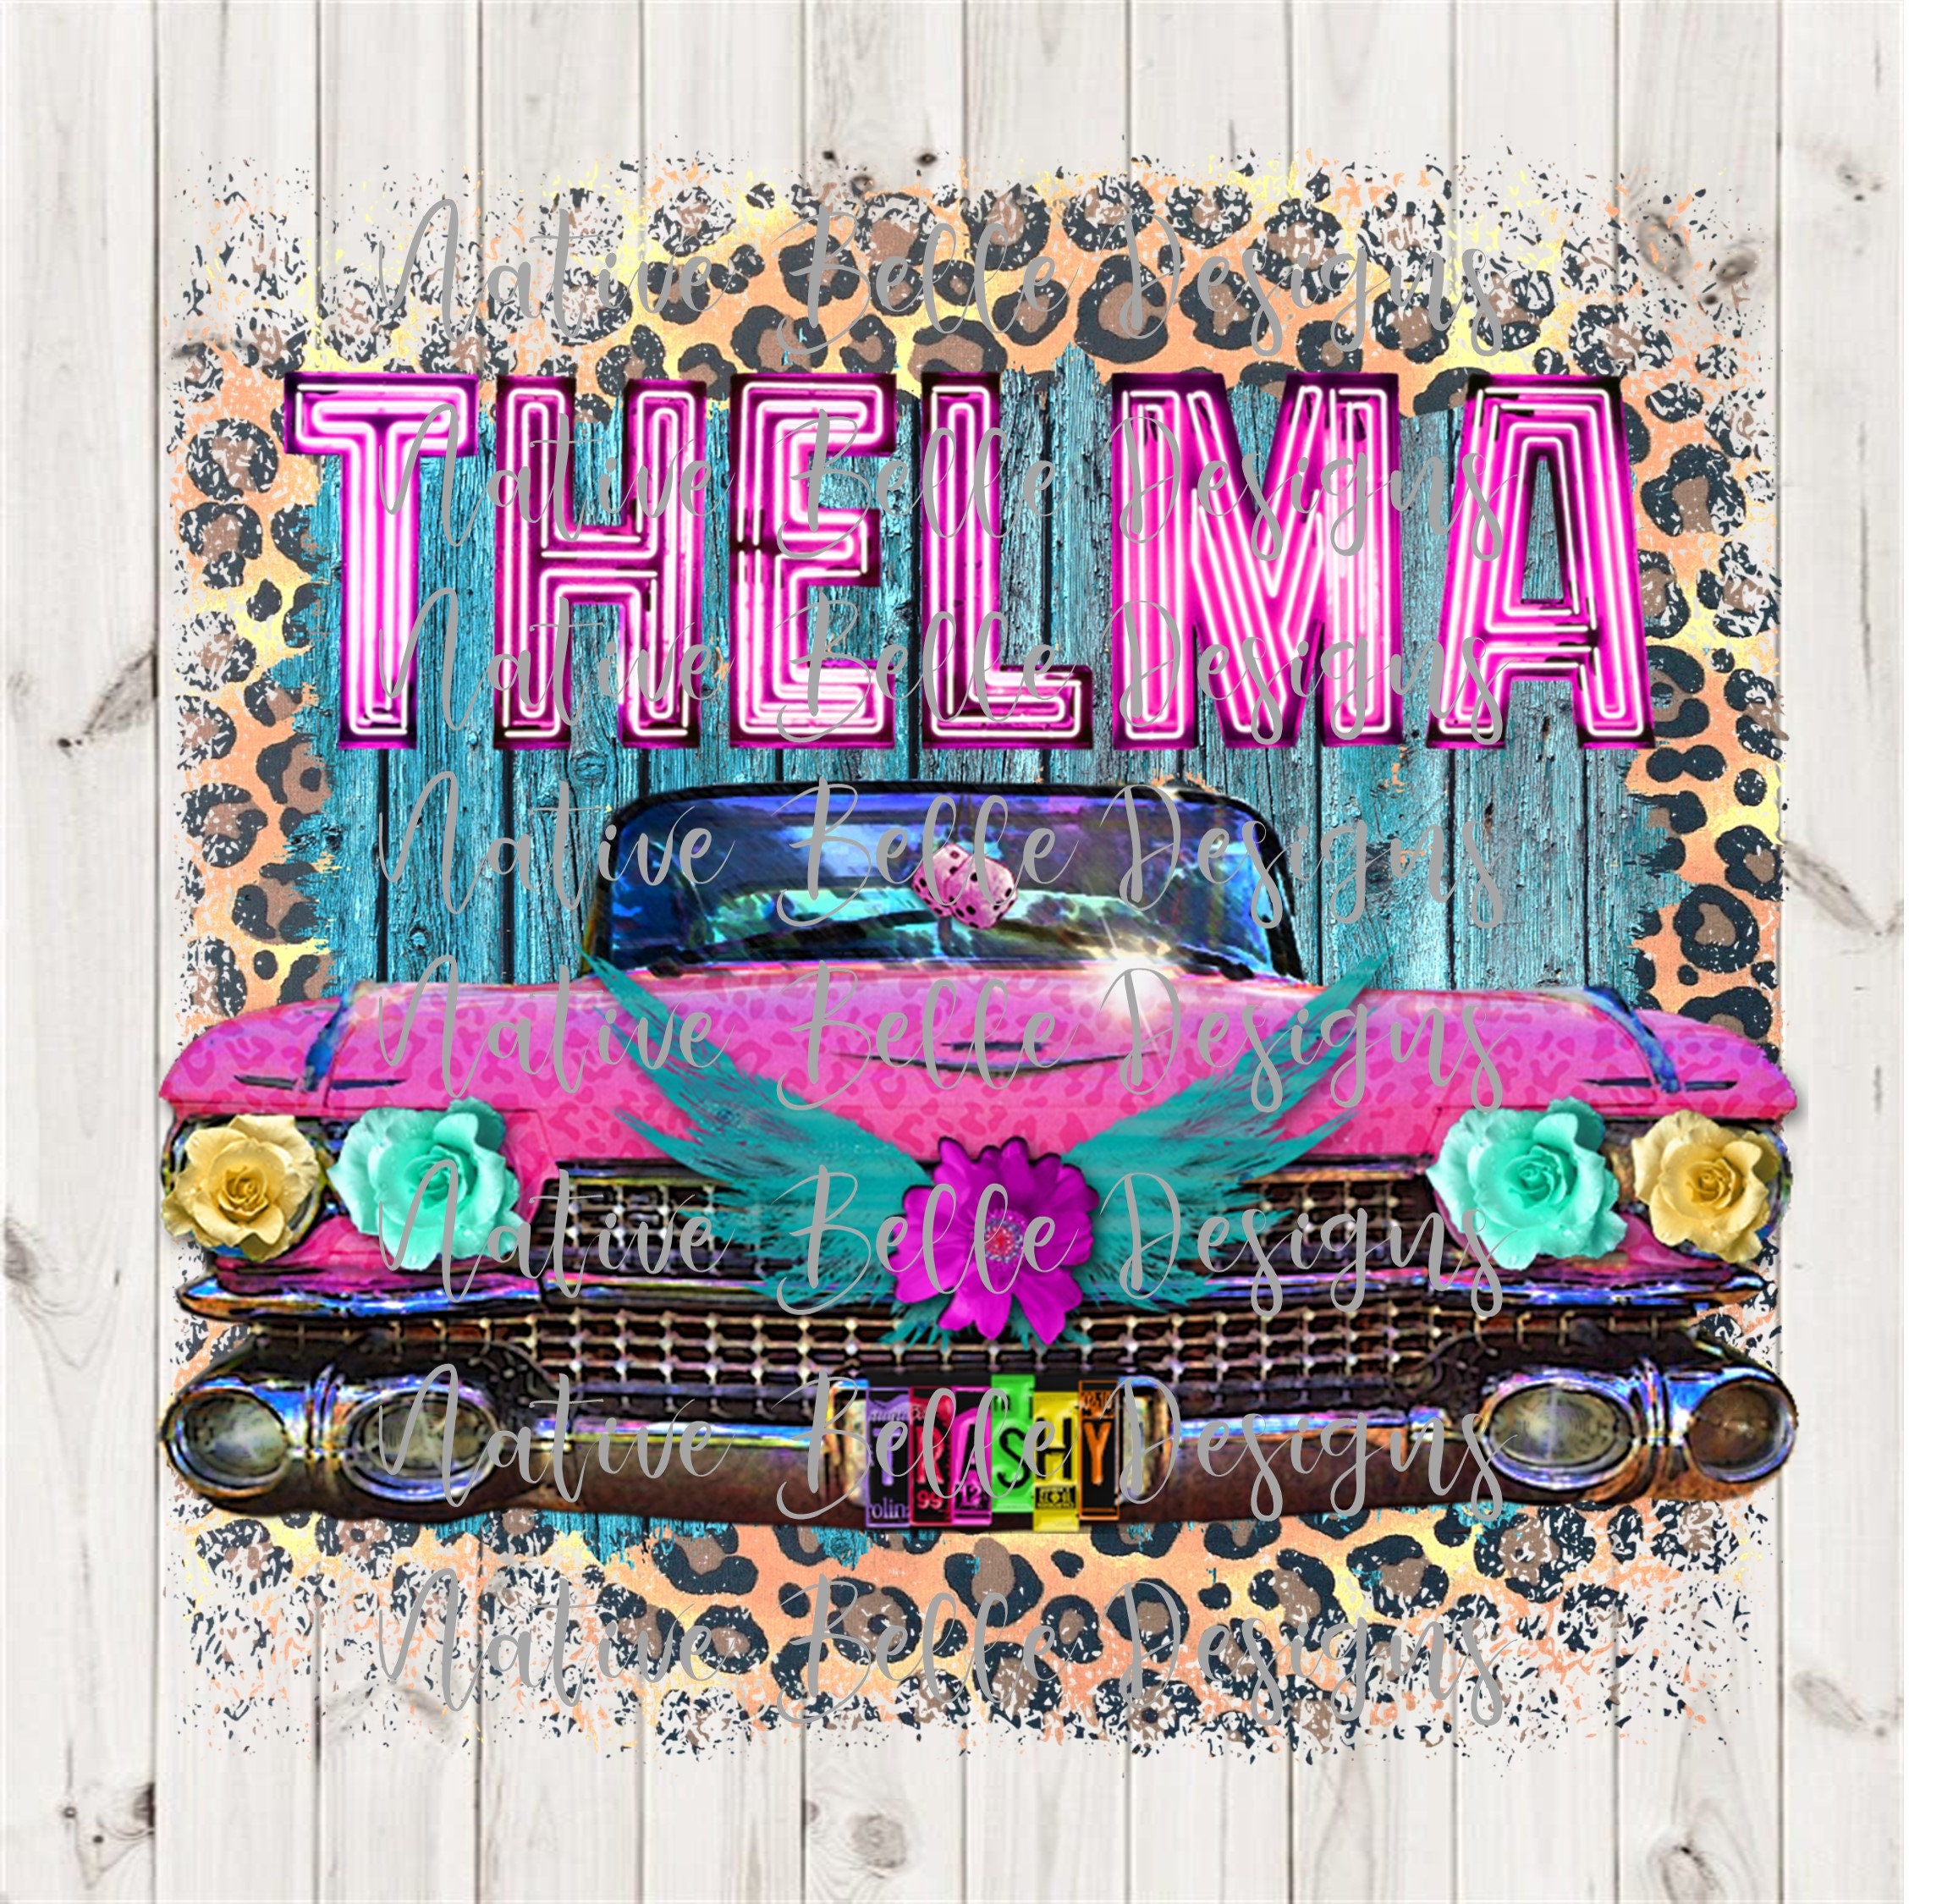 SELOPU Soul Sisters Gift Thelma and Louise Keychain Set You're The  Louise/Thelma to My Thelma/Louise Keychains